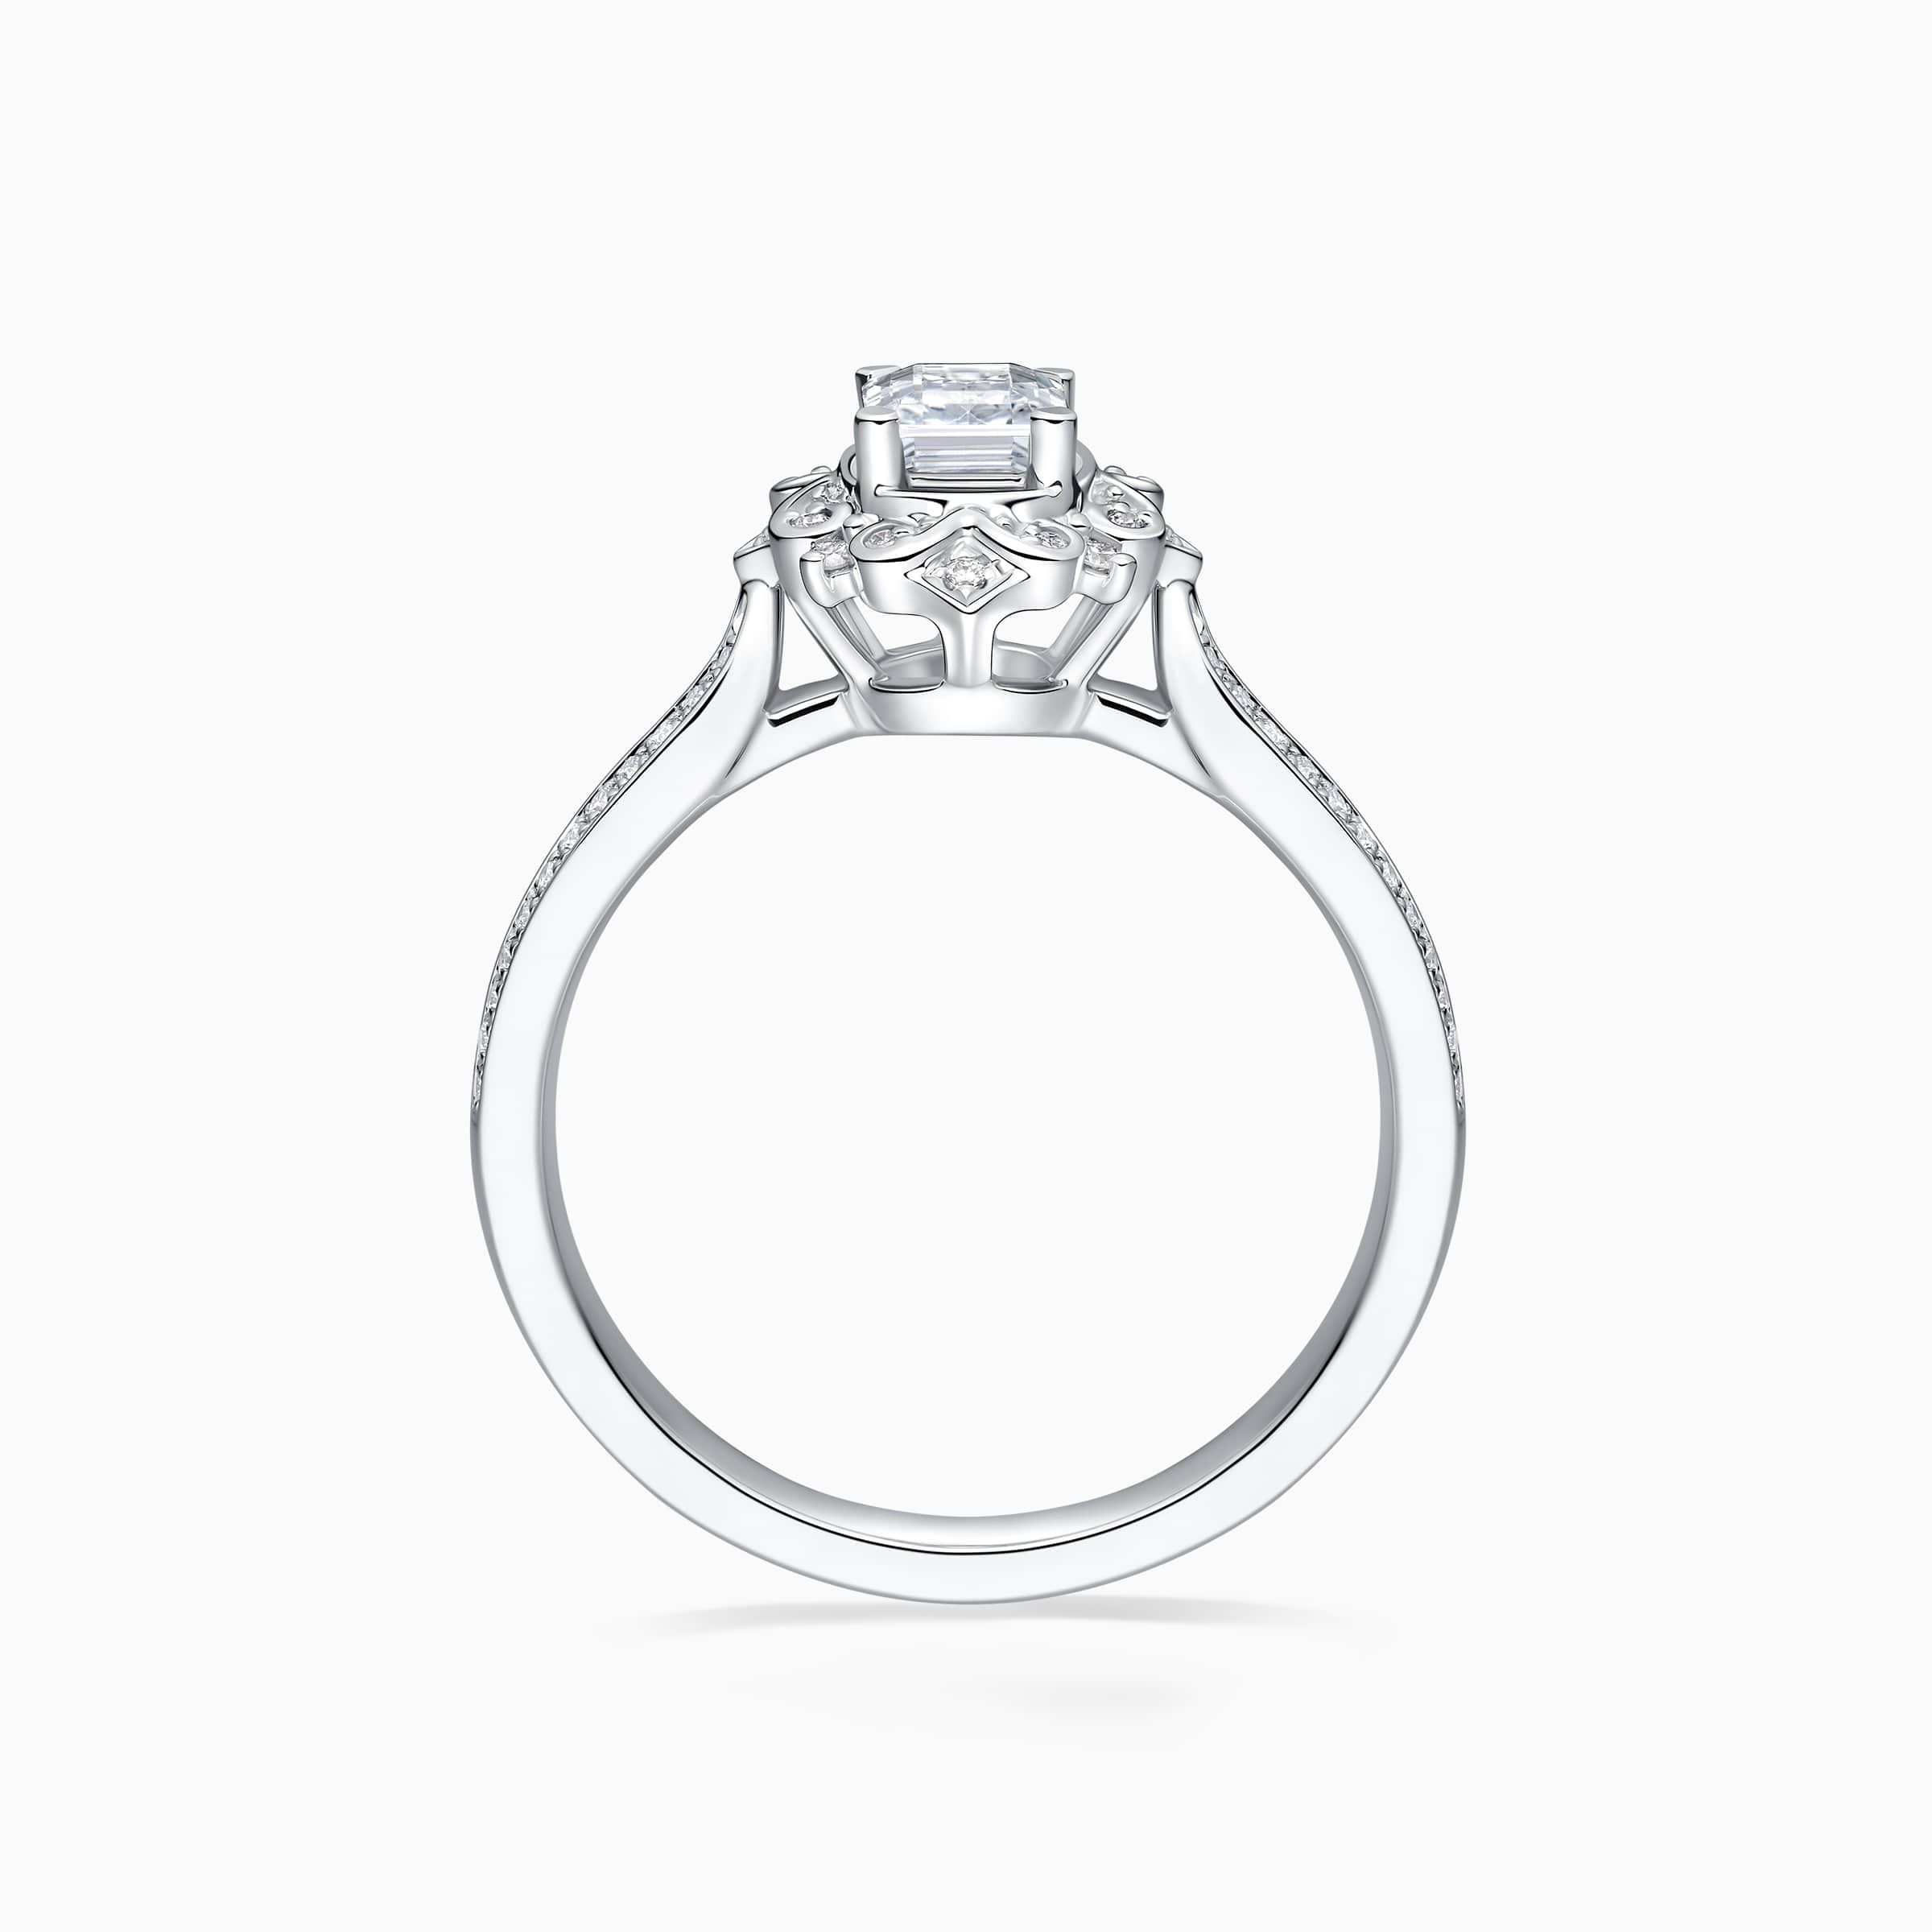 Darry Ring vintage emerald cut engagement ring front view